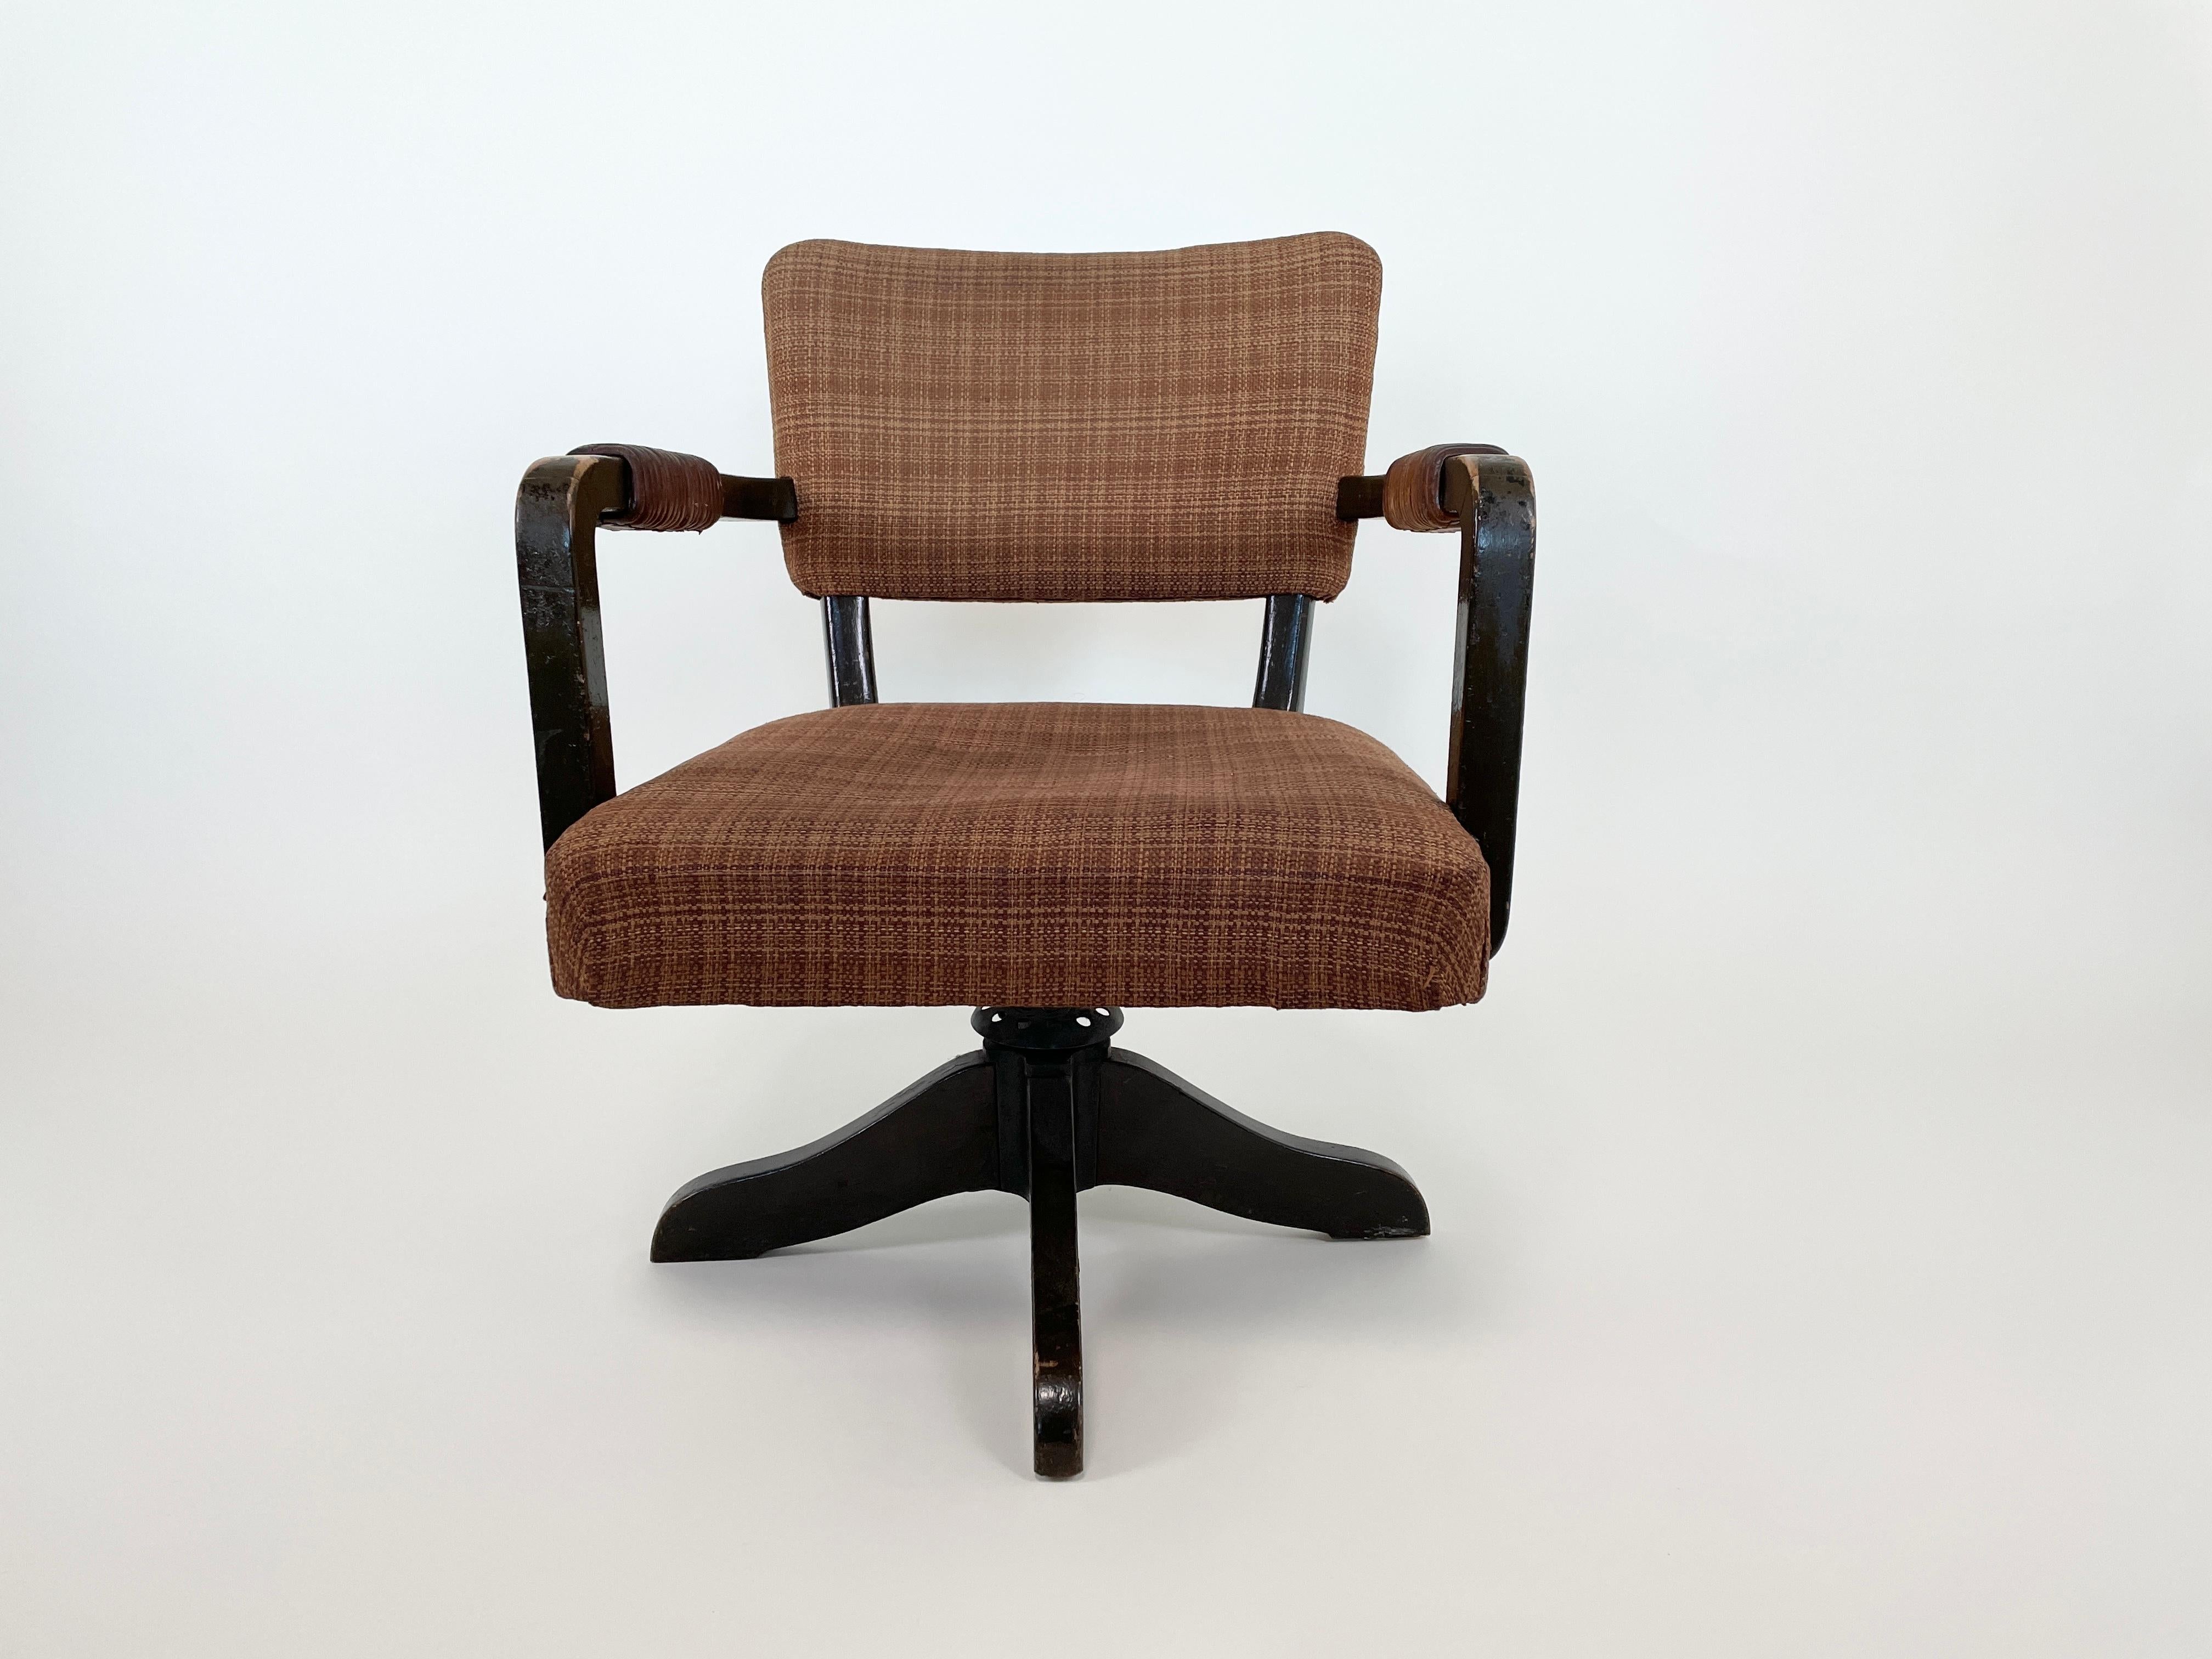 Introducing the extremely rare Aino Aalto Swivel Chair nr 1118, designed between 1935 and 1936 by Finnish architect Aino Marsio-Aalto. This chair features its original upholstery and an adjustable height mechanism, reflecting the era's functional